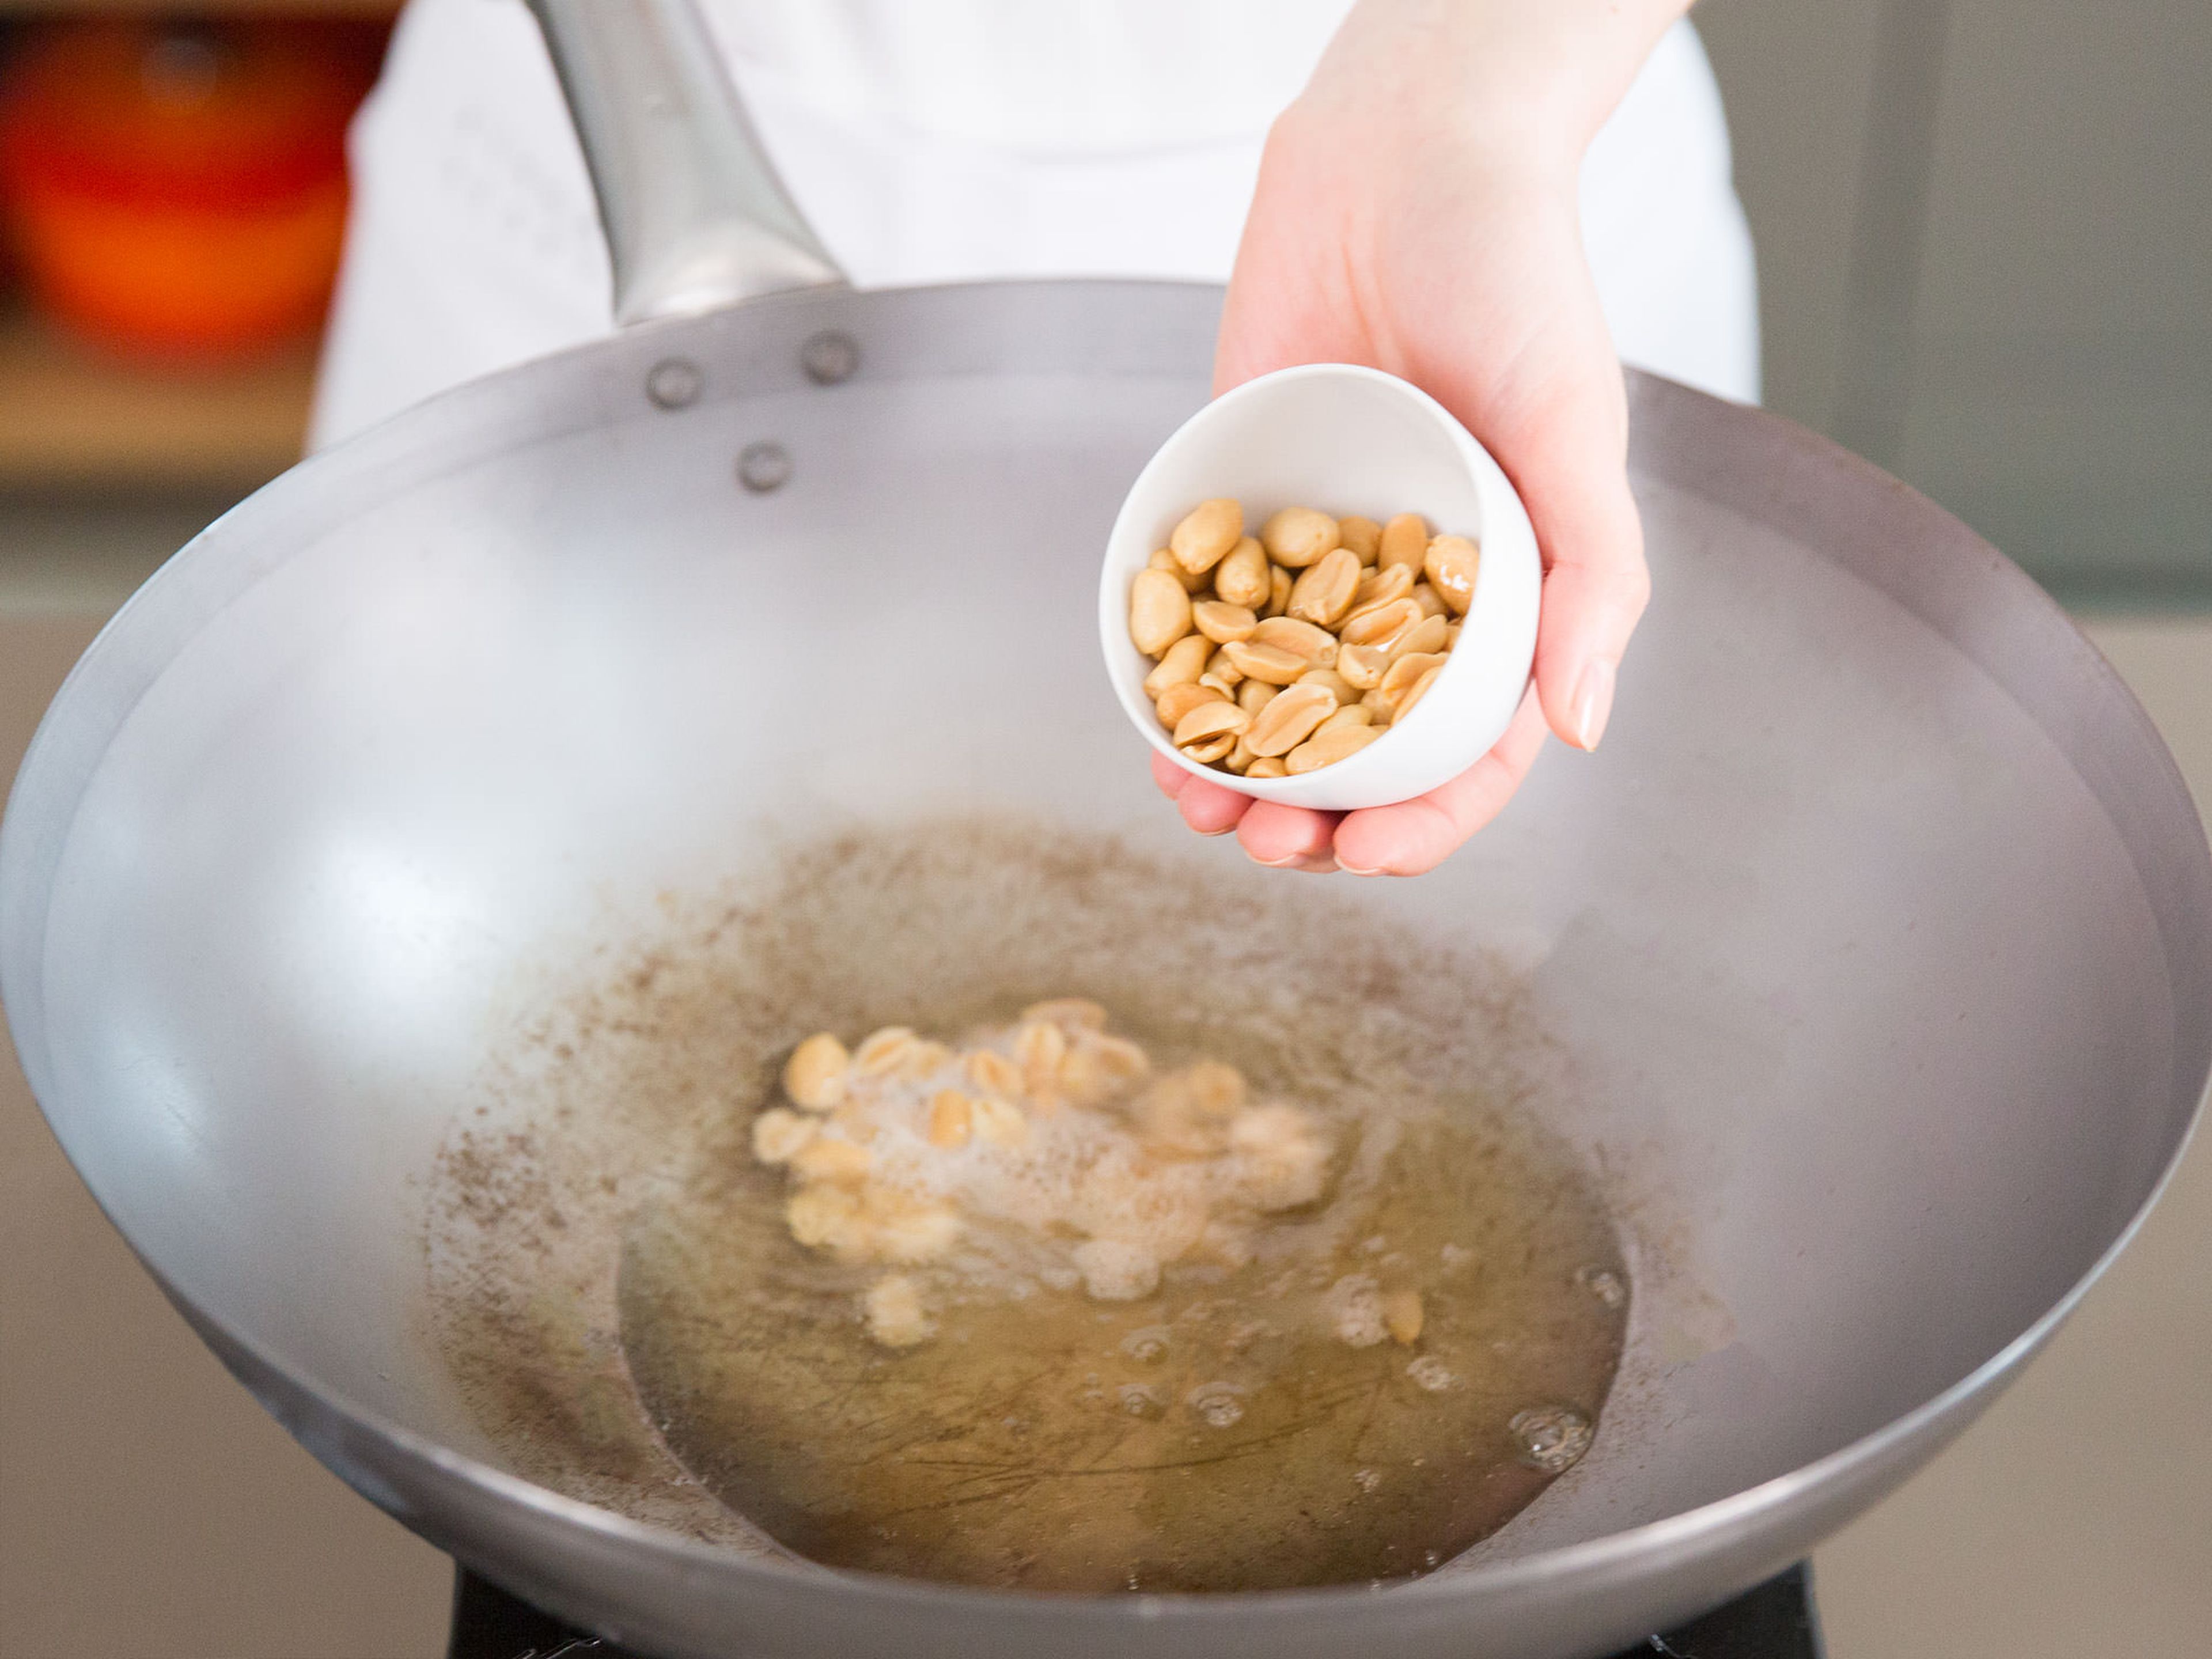 Add oil to a wok and fry peanuts on low heat for approx. 3 – 4 min. Remove from pan, drain on a layer of paper towels, and set aside.